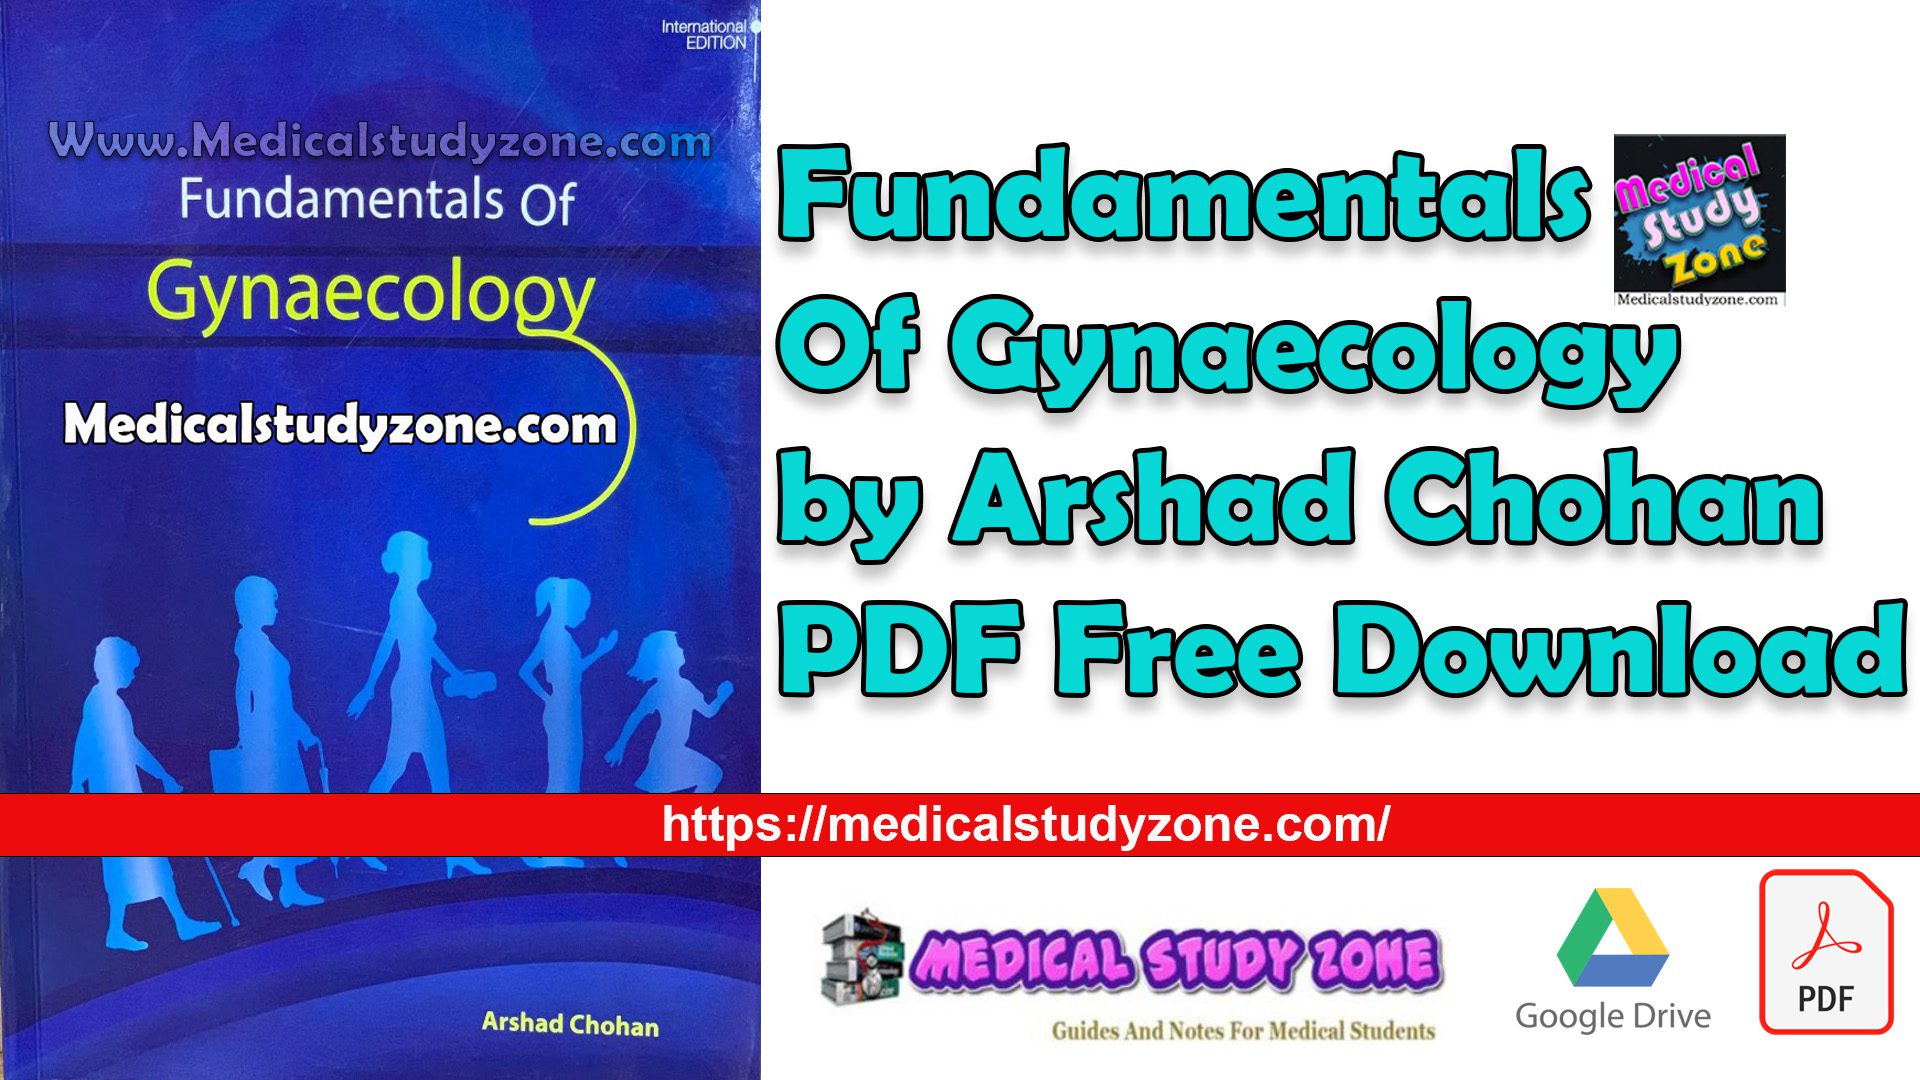 Fundamentals Of Gynaecology by Arshad Chohan PDF Free Download